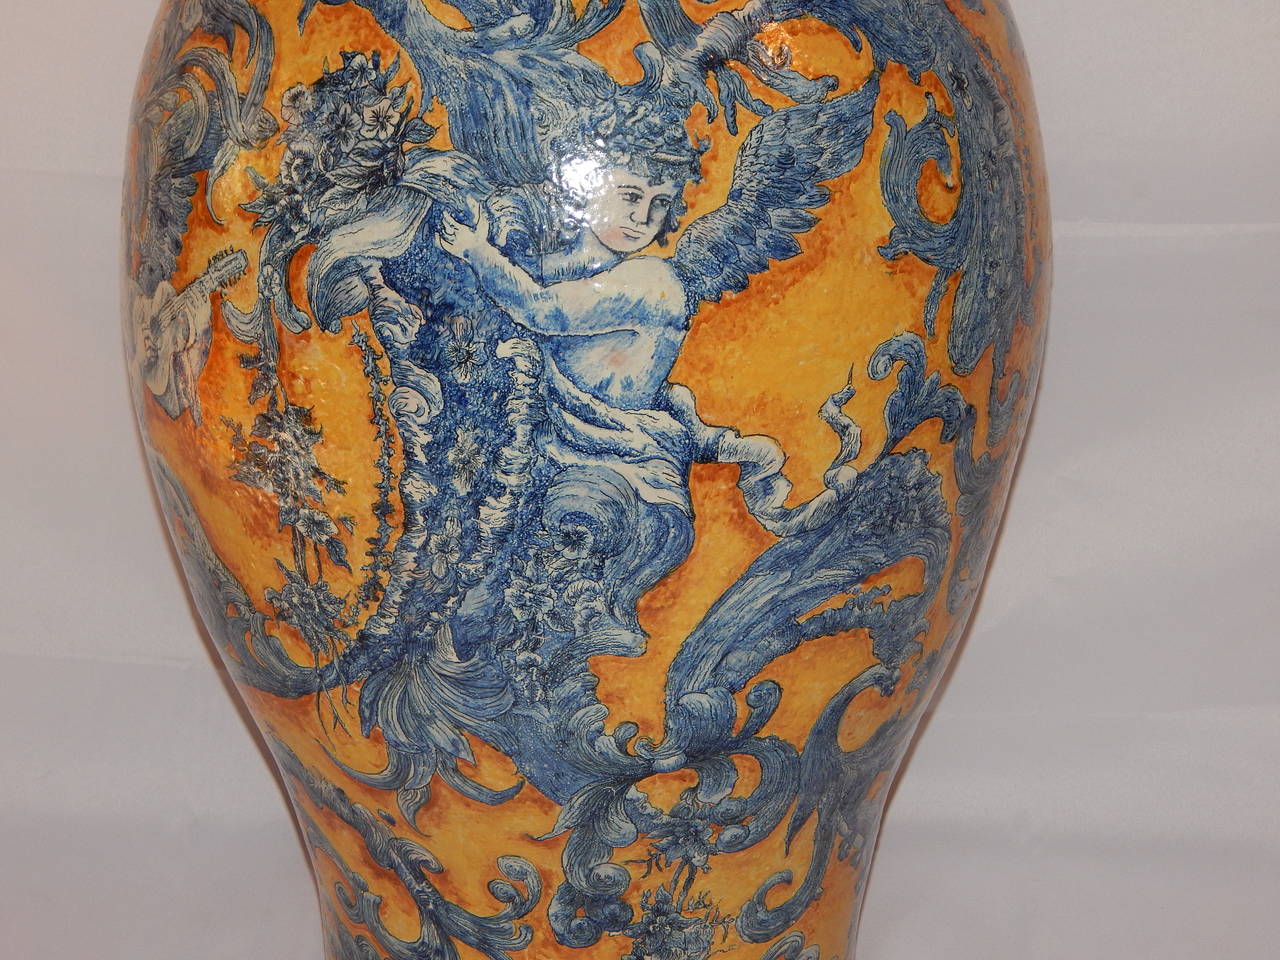  Paint Decorated Faience Covered Floor Vase, Signed 1